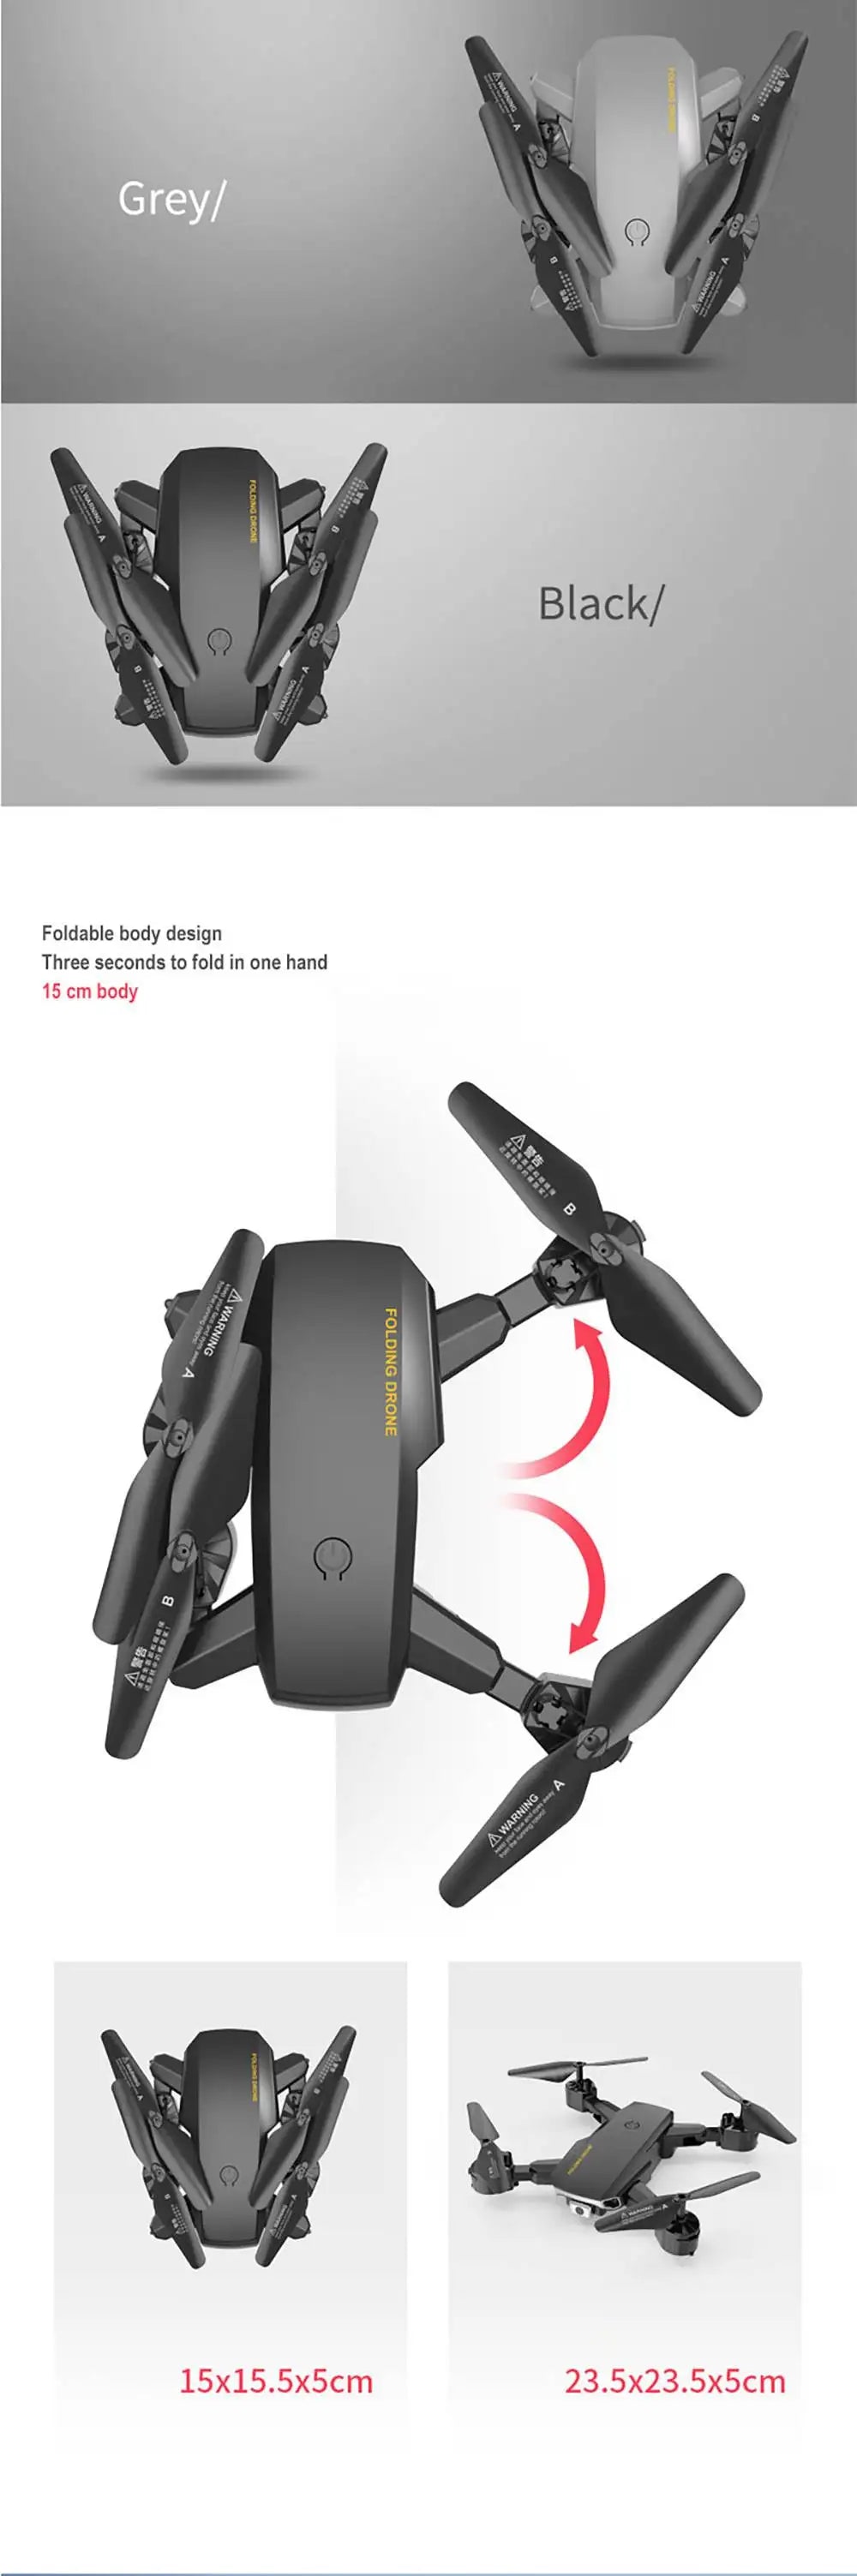 Eachine S60 Mini Drone, greyl black/ foldable body design three seconds to fold in one